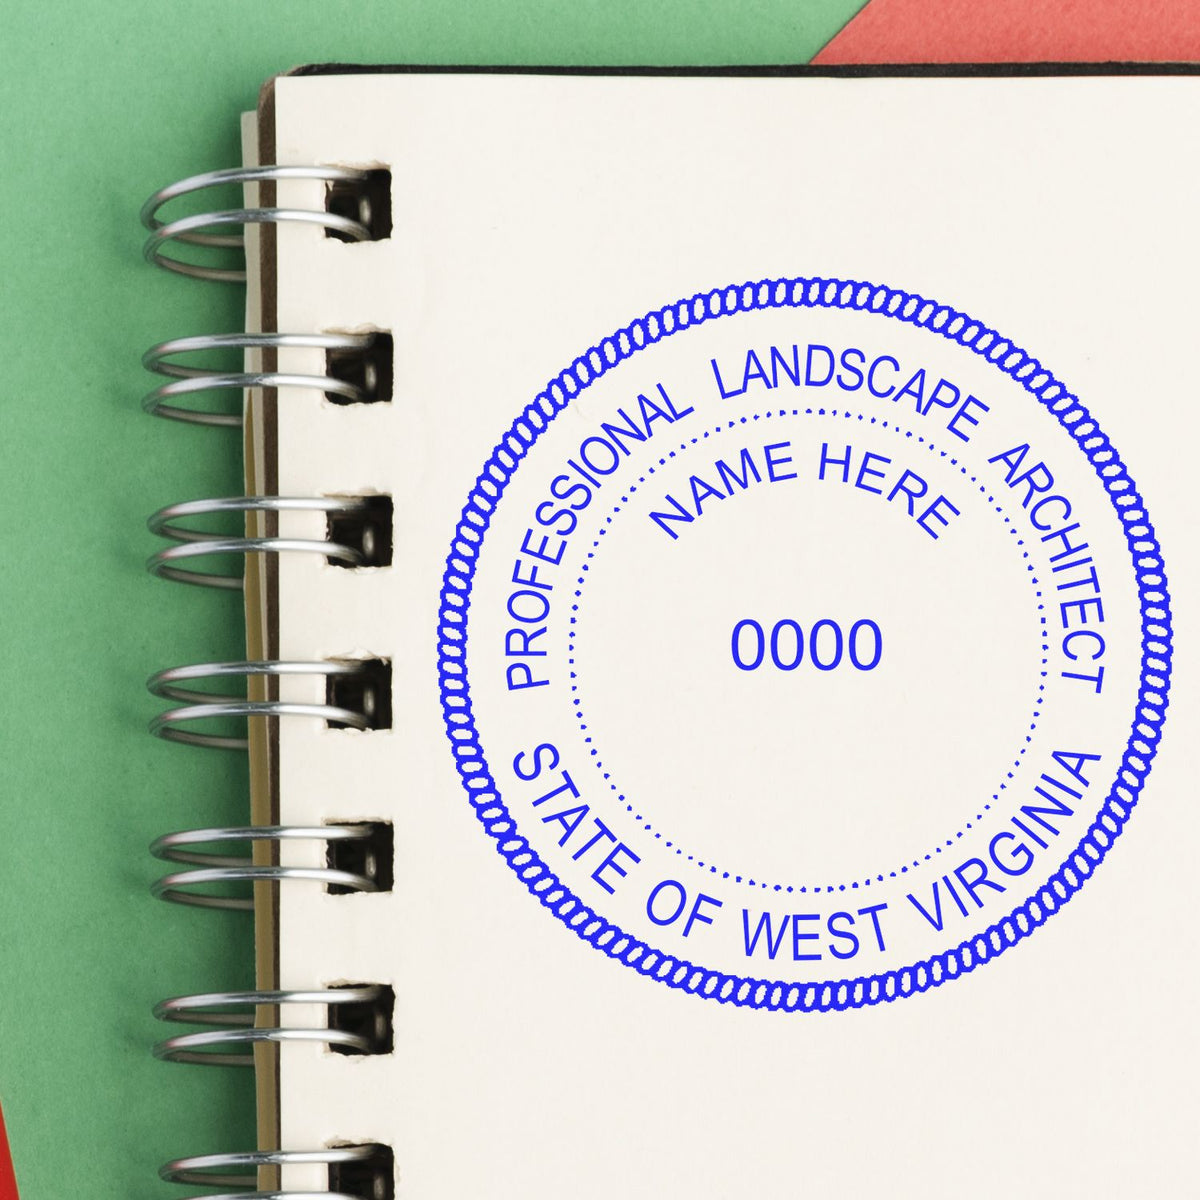 The Premium MaxLight Pre-Inked West Virginia Landscape Architectural Stamp stamp impression comes to life with a crisp, detailed photo on paper - showcasing true professional quality.